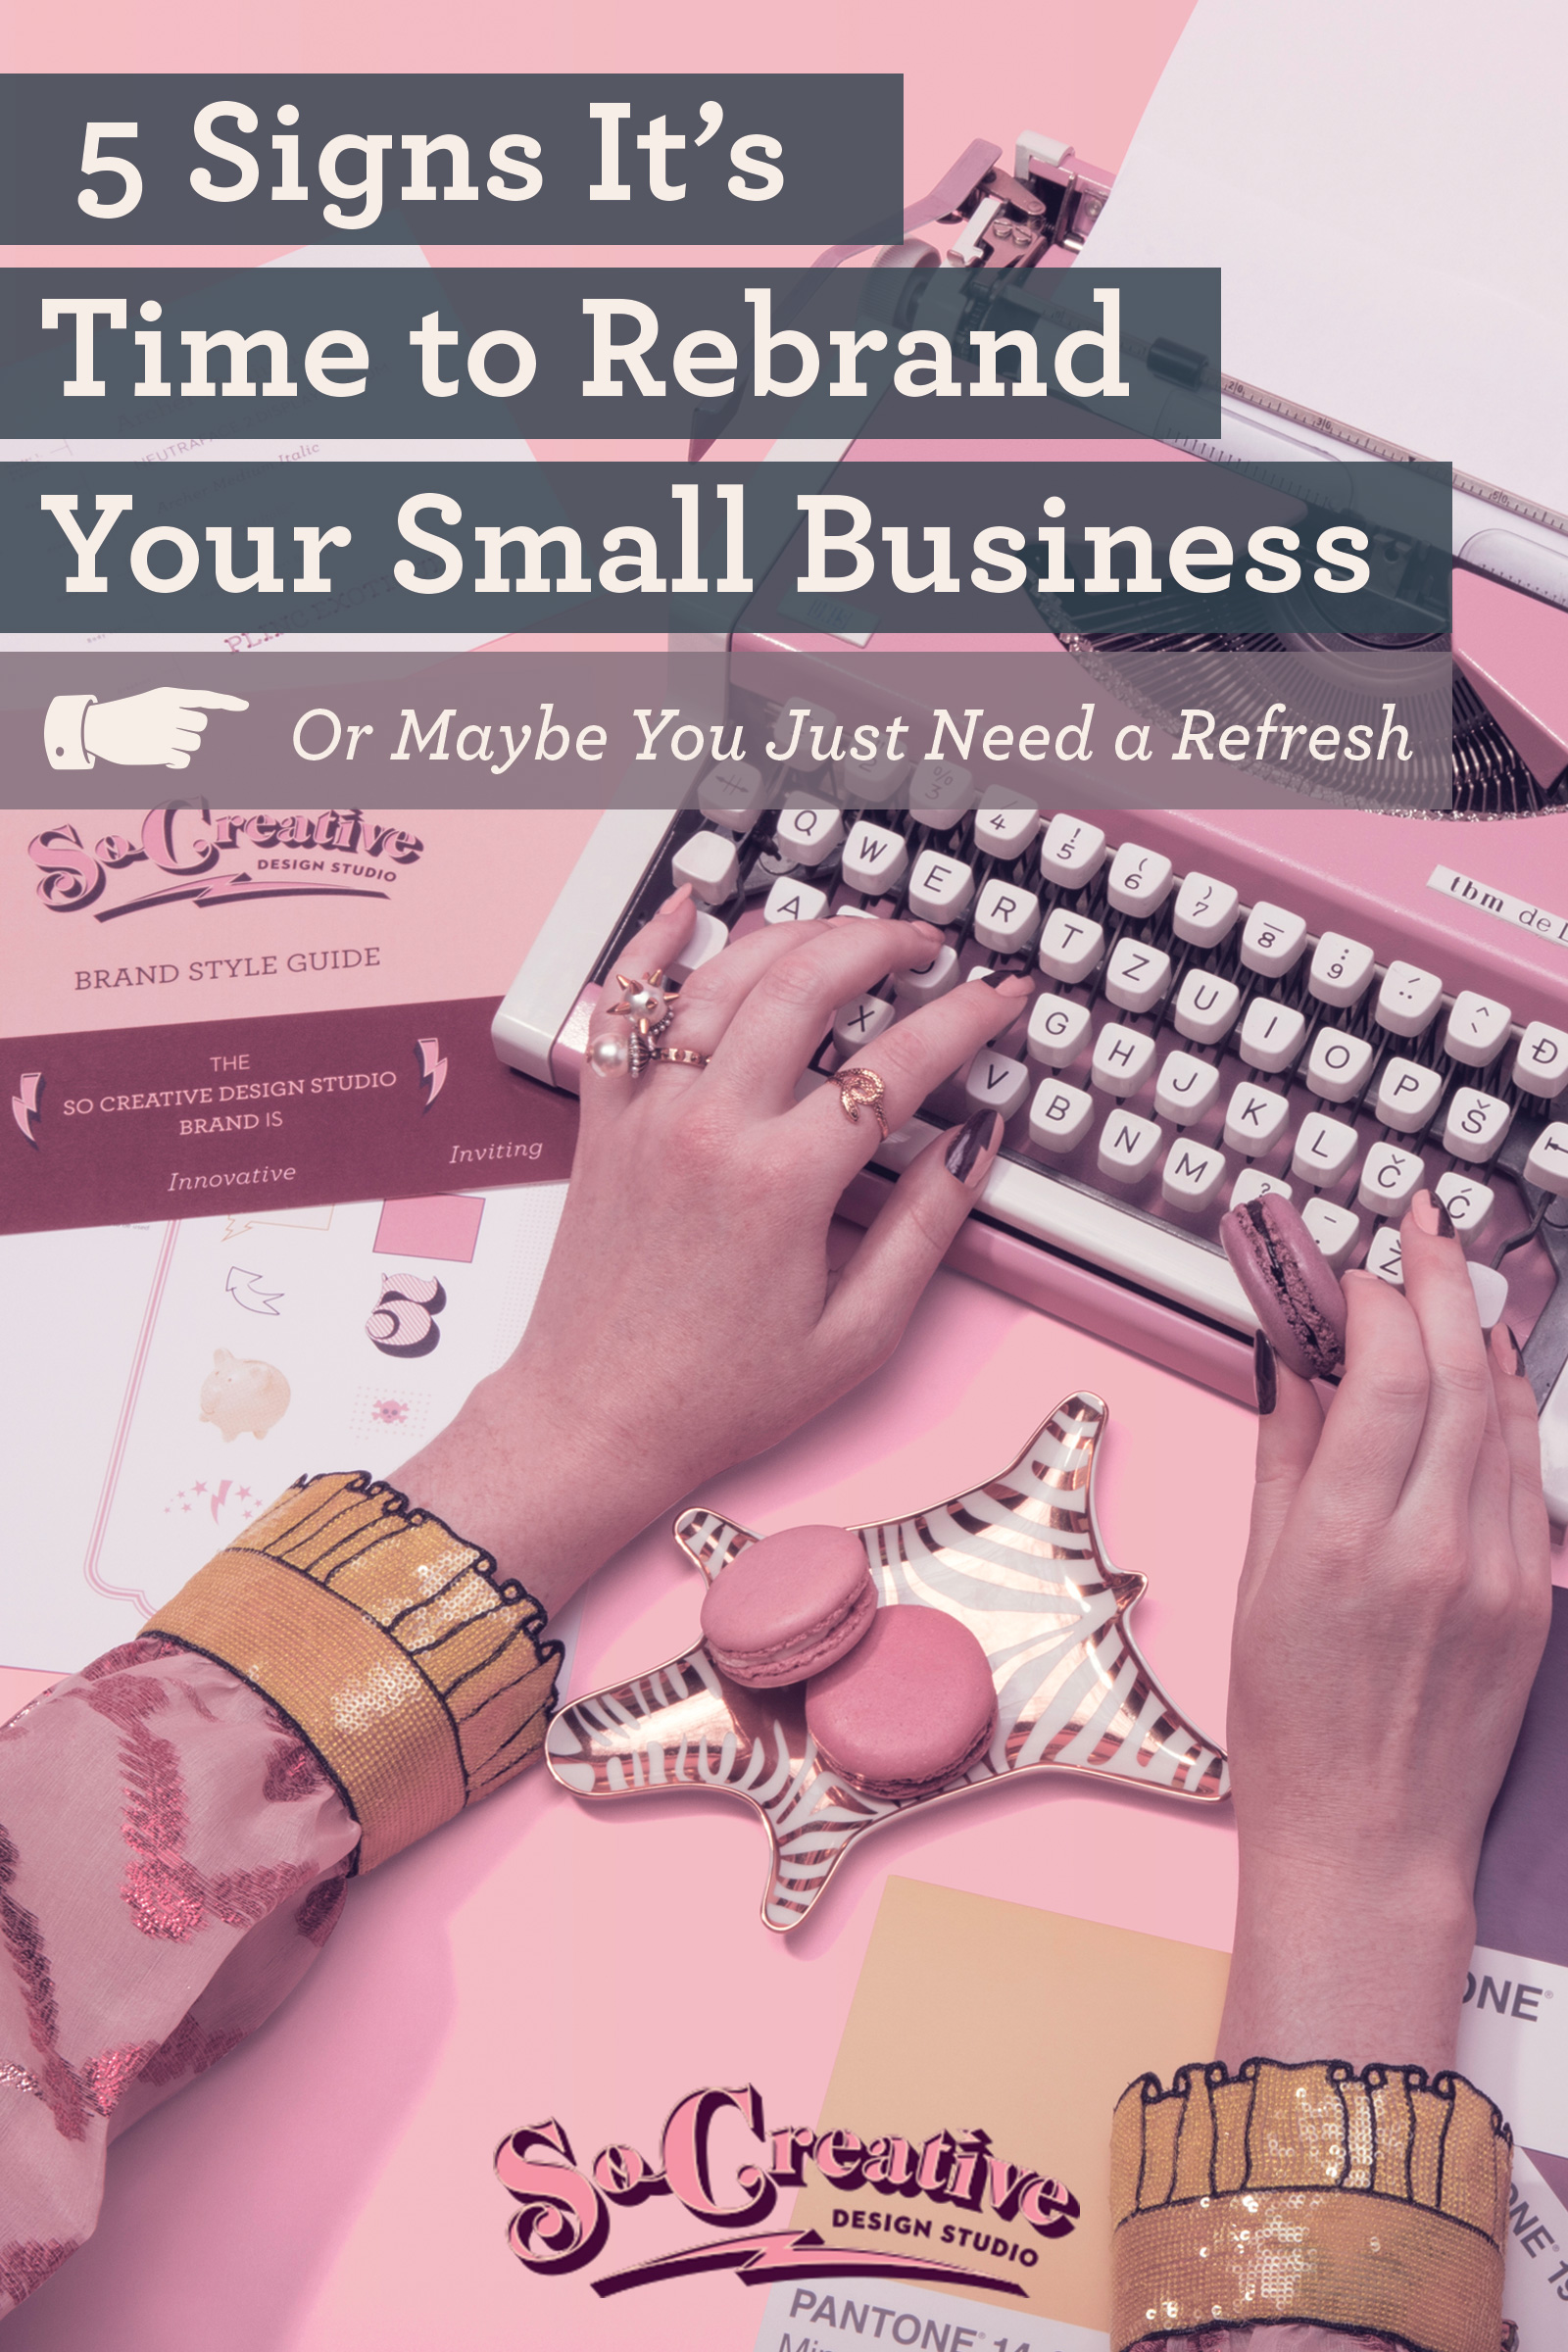 5 signs it's time to rebrand your small business